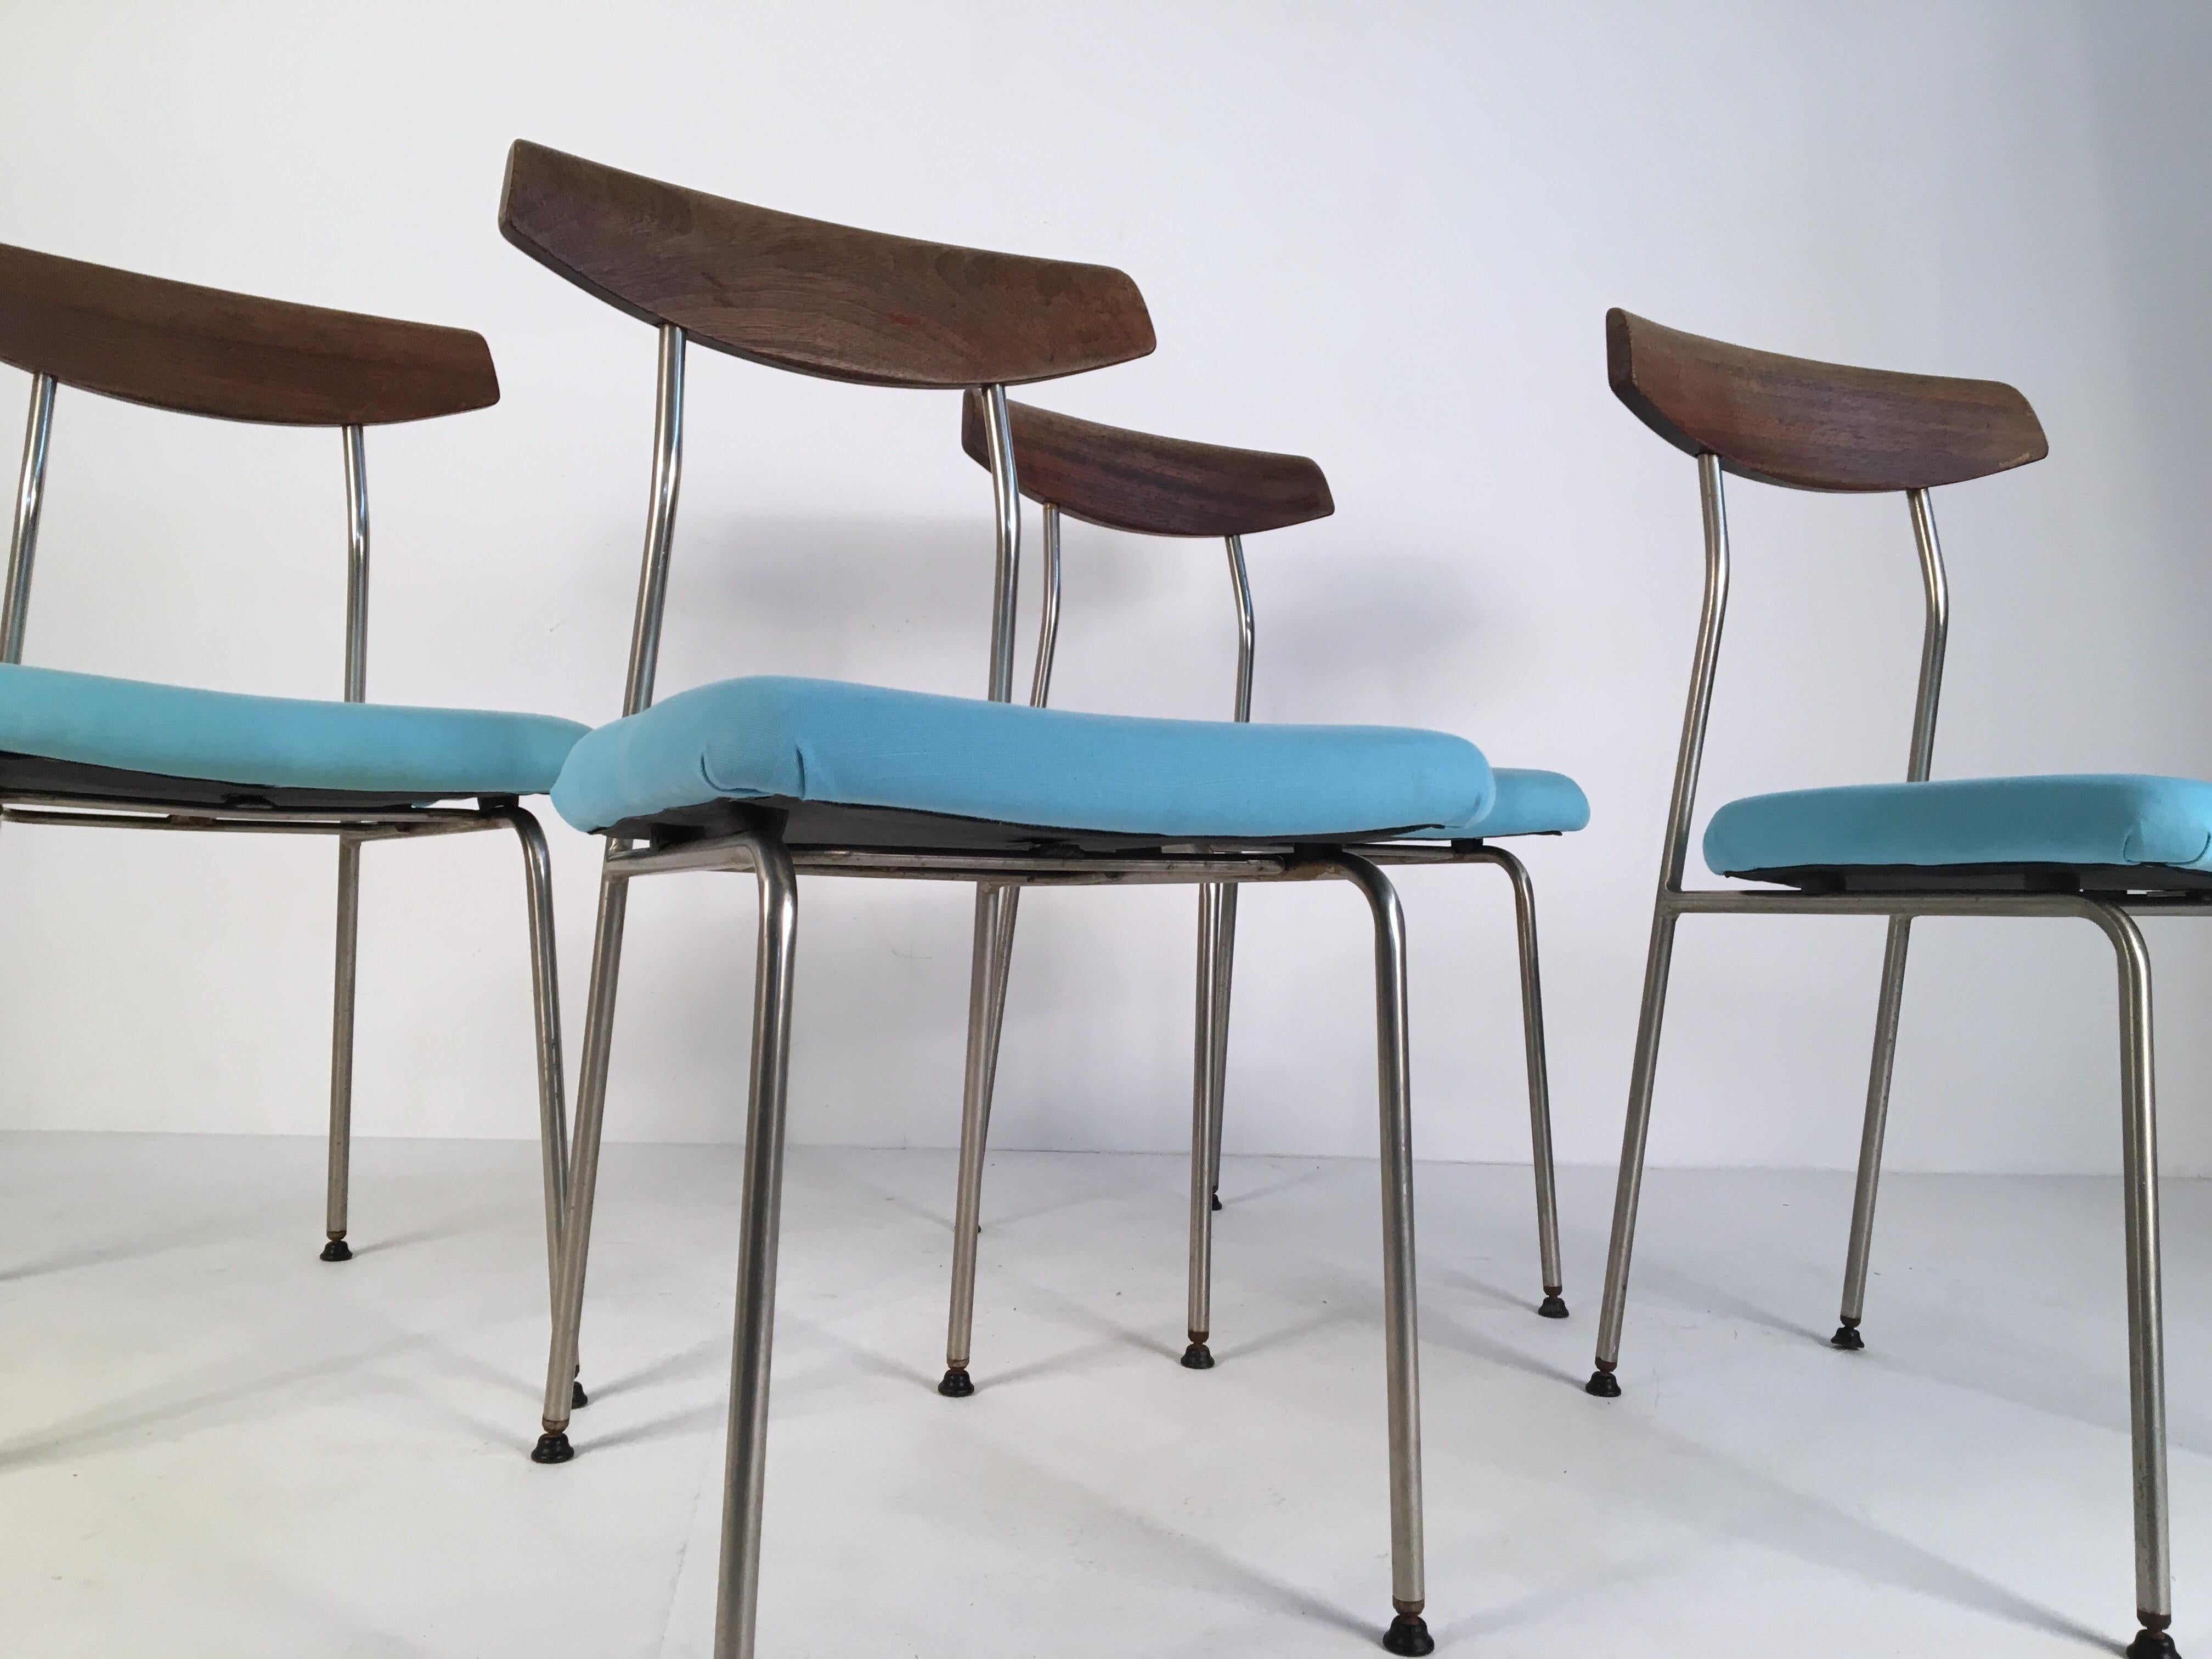 Set of 4 dining chairs designed by John and Sylvia Reid for Stag in the 1950s. Solid teak backrests sits on steel frames supporting a padded blue upholstered seat.
 